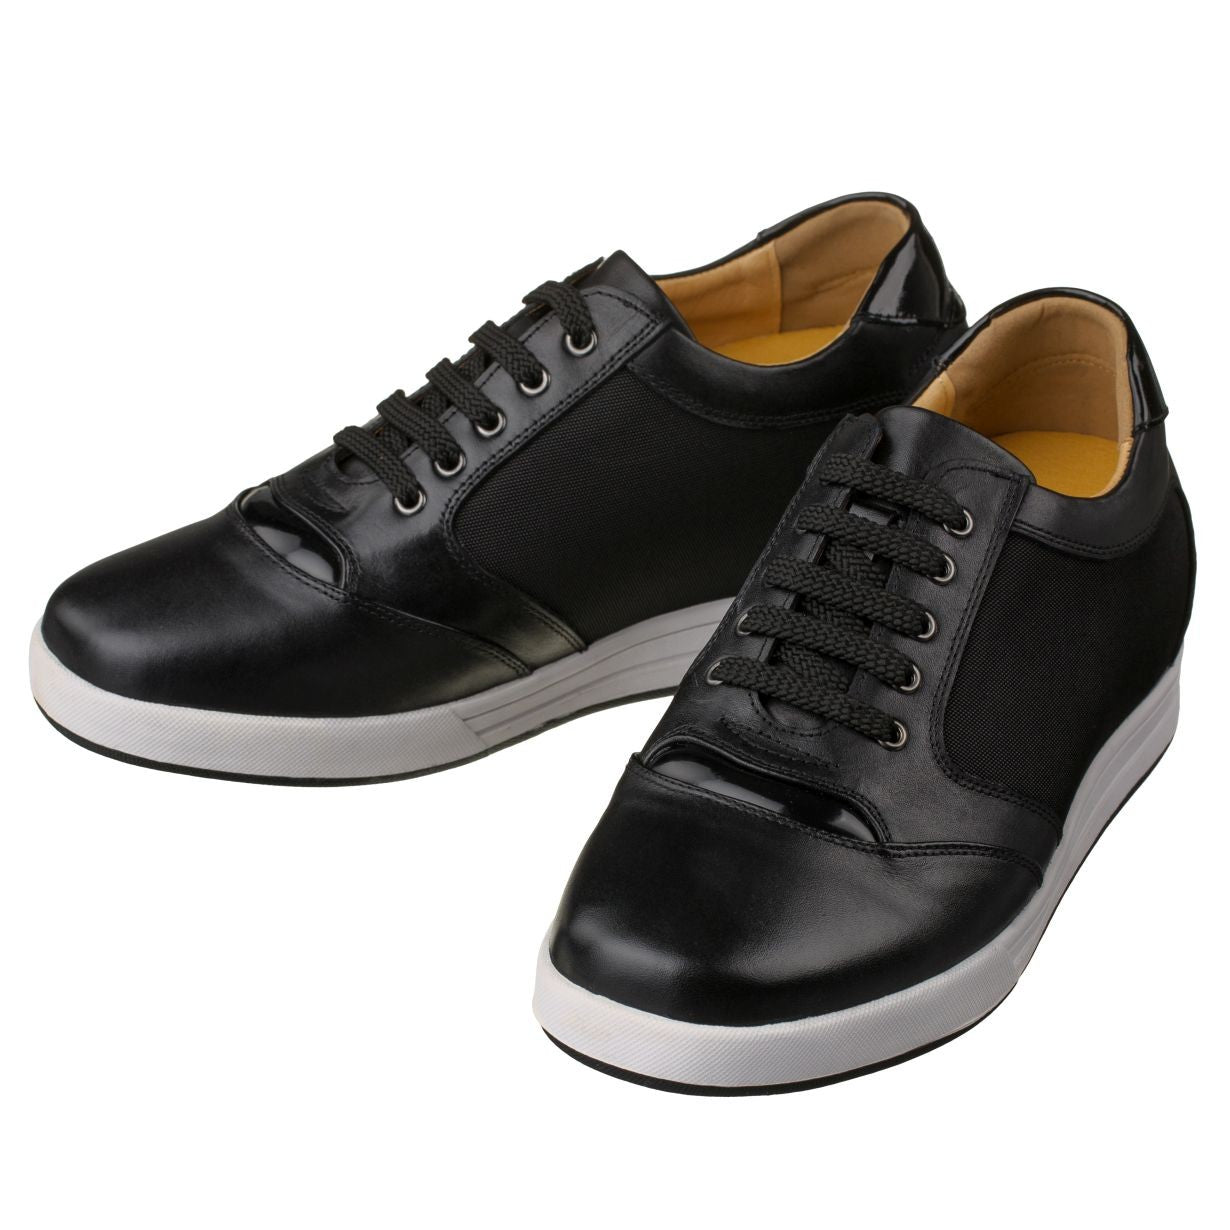 Elevator shoes height increase TOTO 3.2-Inch Taller Men's Elevator Sneakers